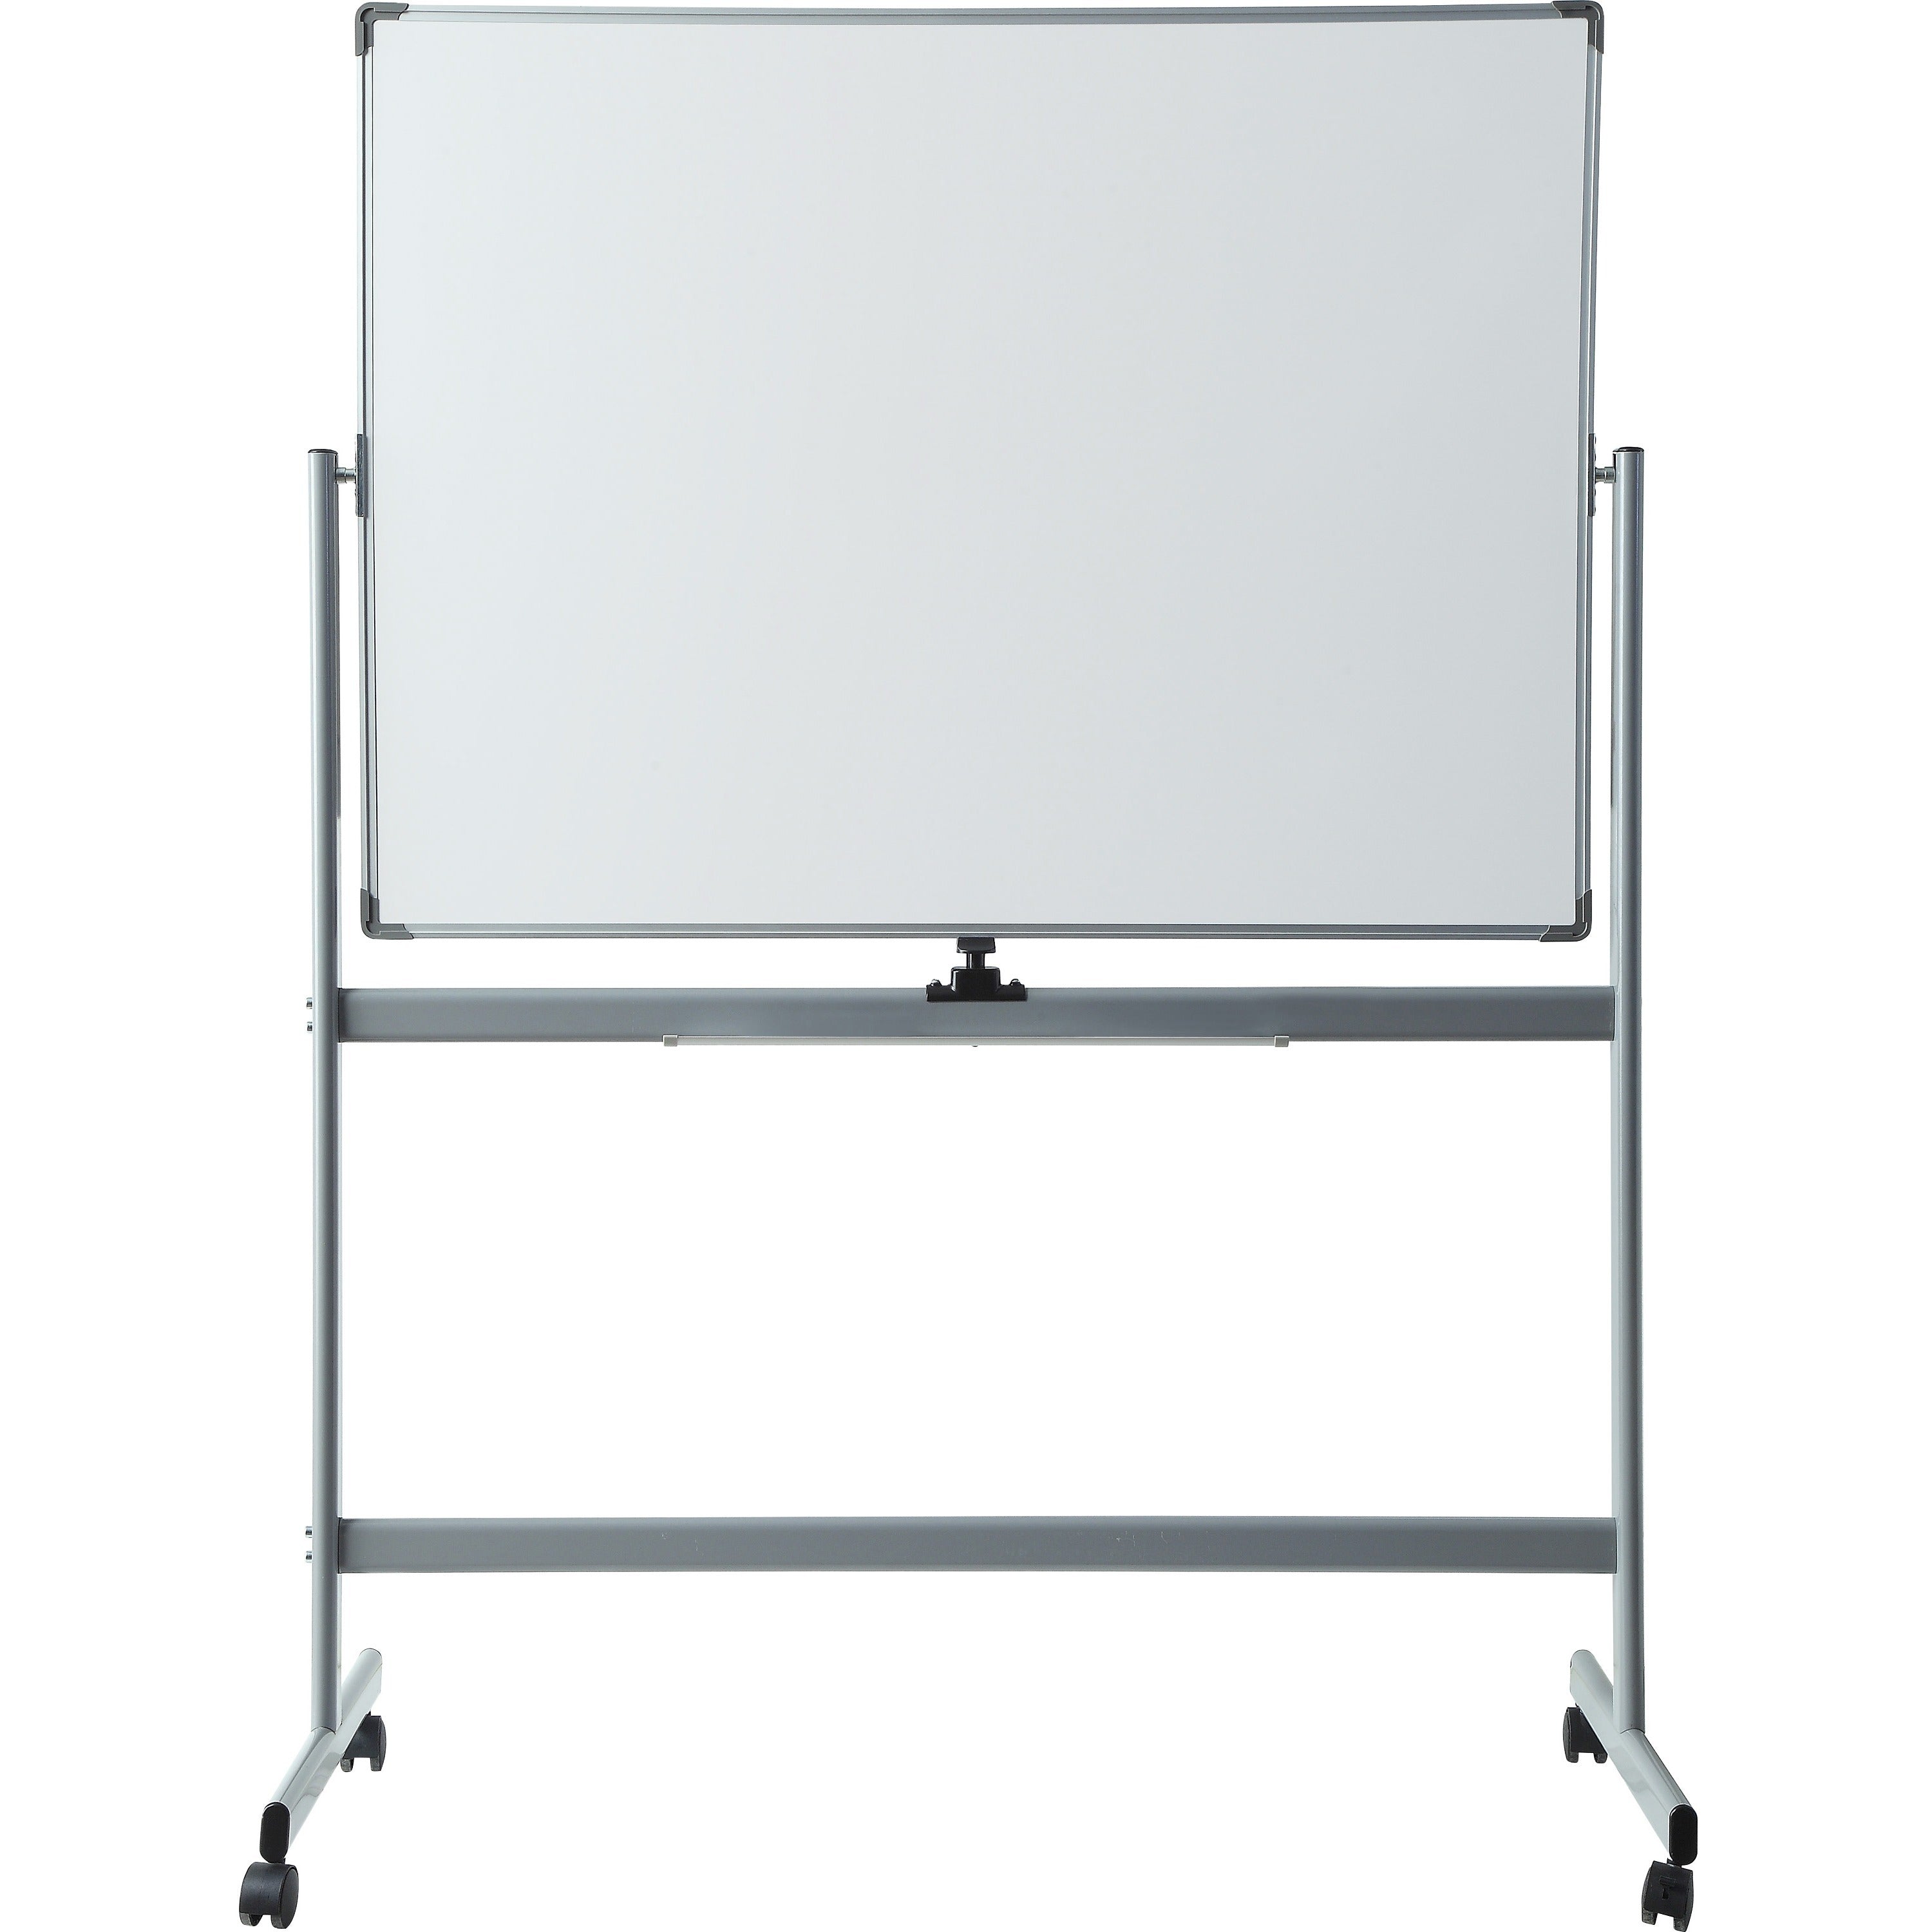 lorell-double-sided-magnetic-whiteboard-easel-72-6-ft-width-x-48-4-ft-height-white-surface-rectangle-floor-standing-magnetic-1-each_llr52569 - 2